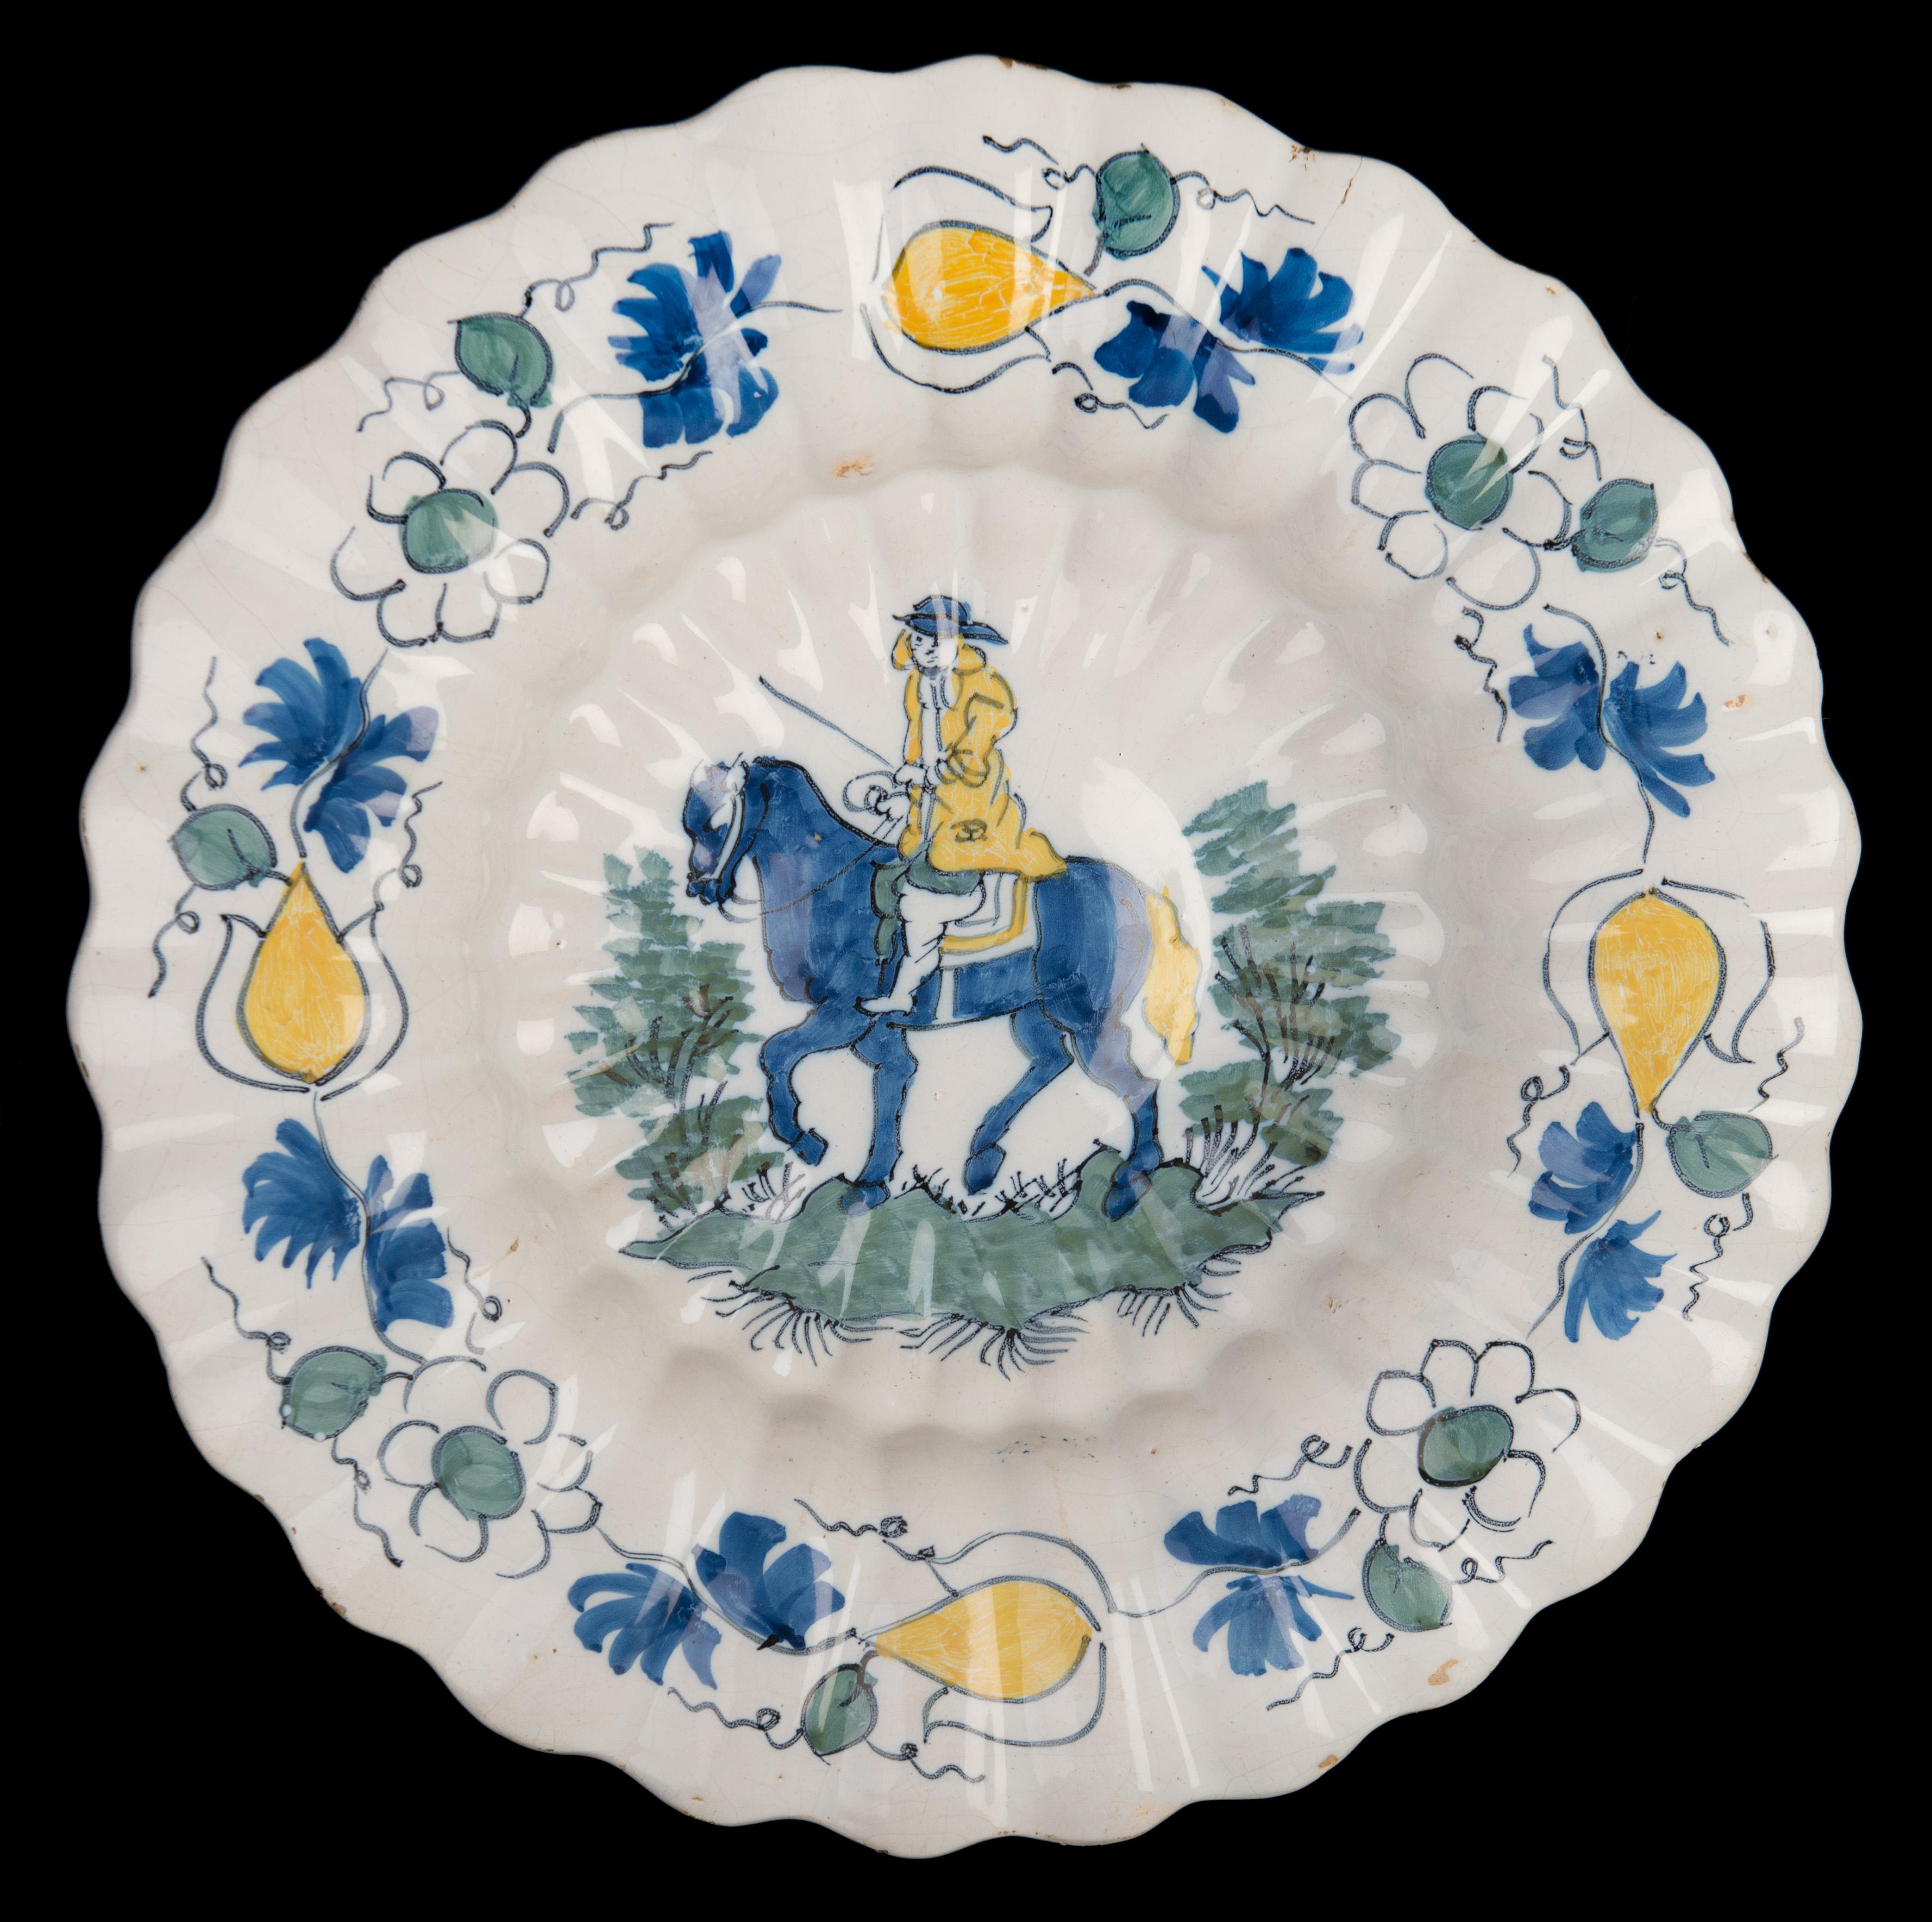 Polychrome lobed dish with horseman. Delft, 1690-1700.
Dimensions: diameter 33,8 cm / 13 in.

The lobed dish is composed of twenty-seven double lobes and is painted in polychrome with a central motif of a horseman. The border is decorated with a